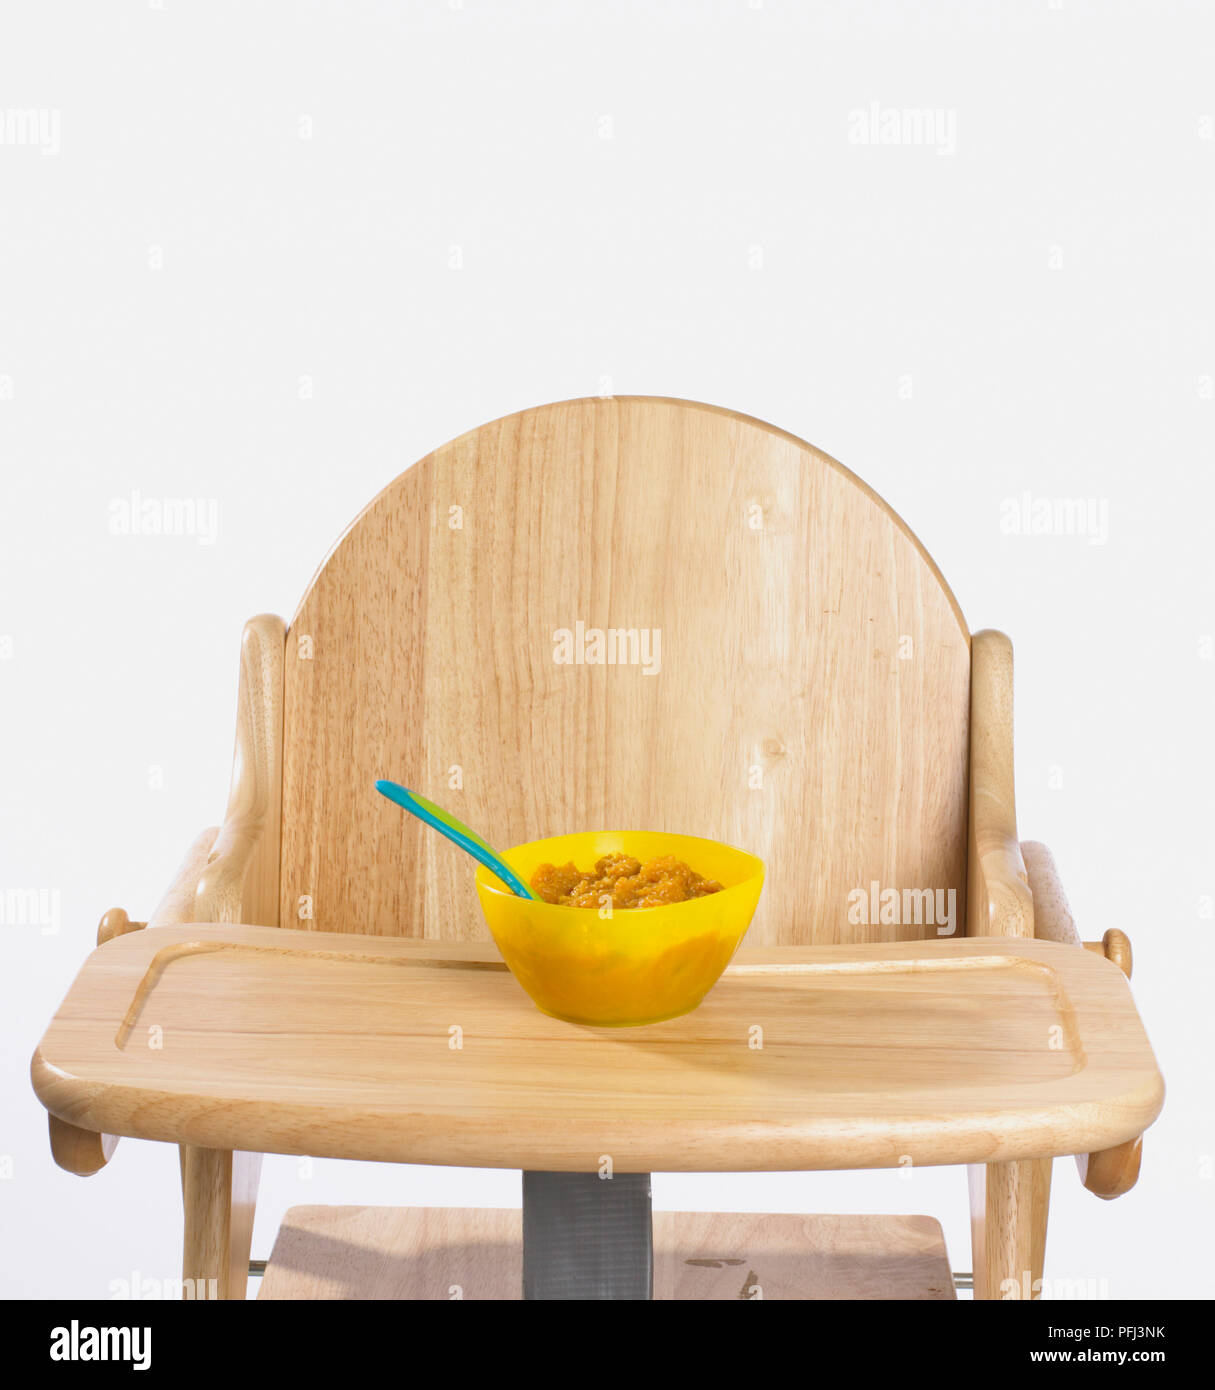 Download Baby Food And Spoon In Yellow Plastic Bowl On Wooden High Chair Stock Photo Alamy Yellowimages Mockups